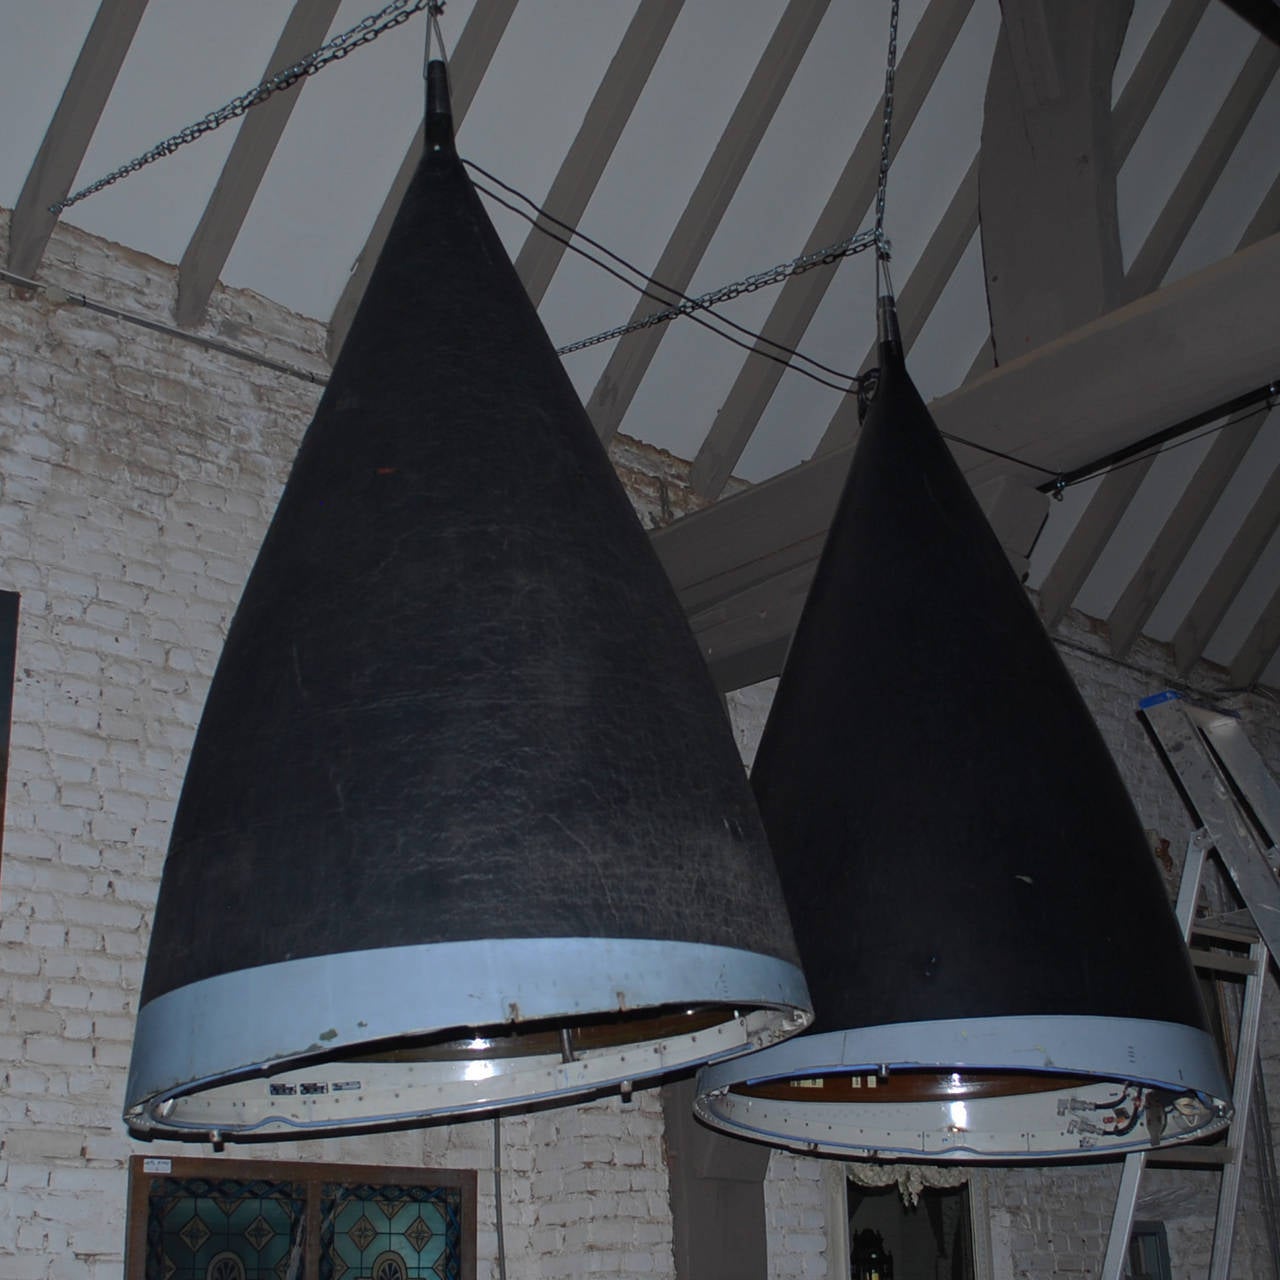 British Pair of huge Industrial Lights Made from Panavia Tornado Jet-Fighter